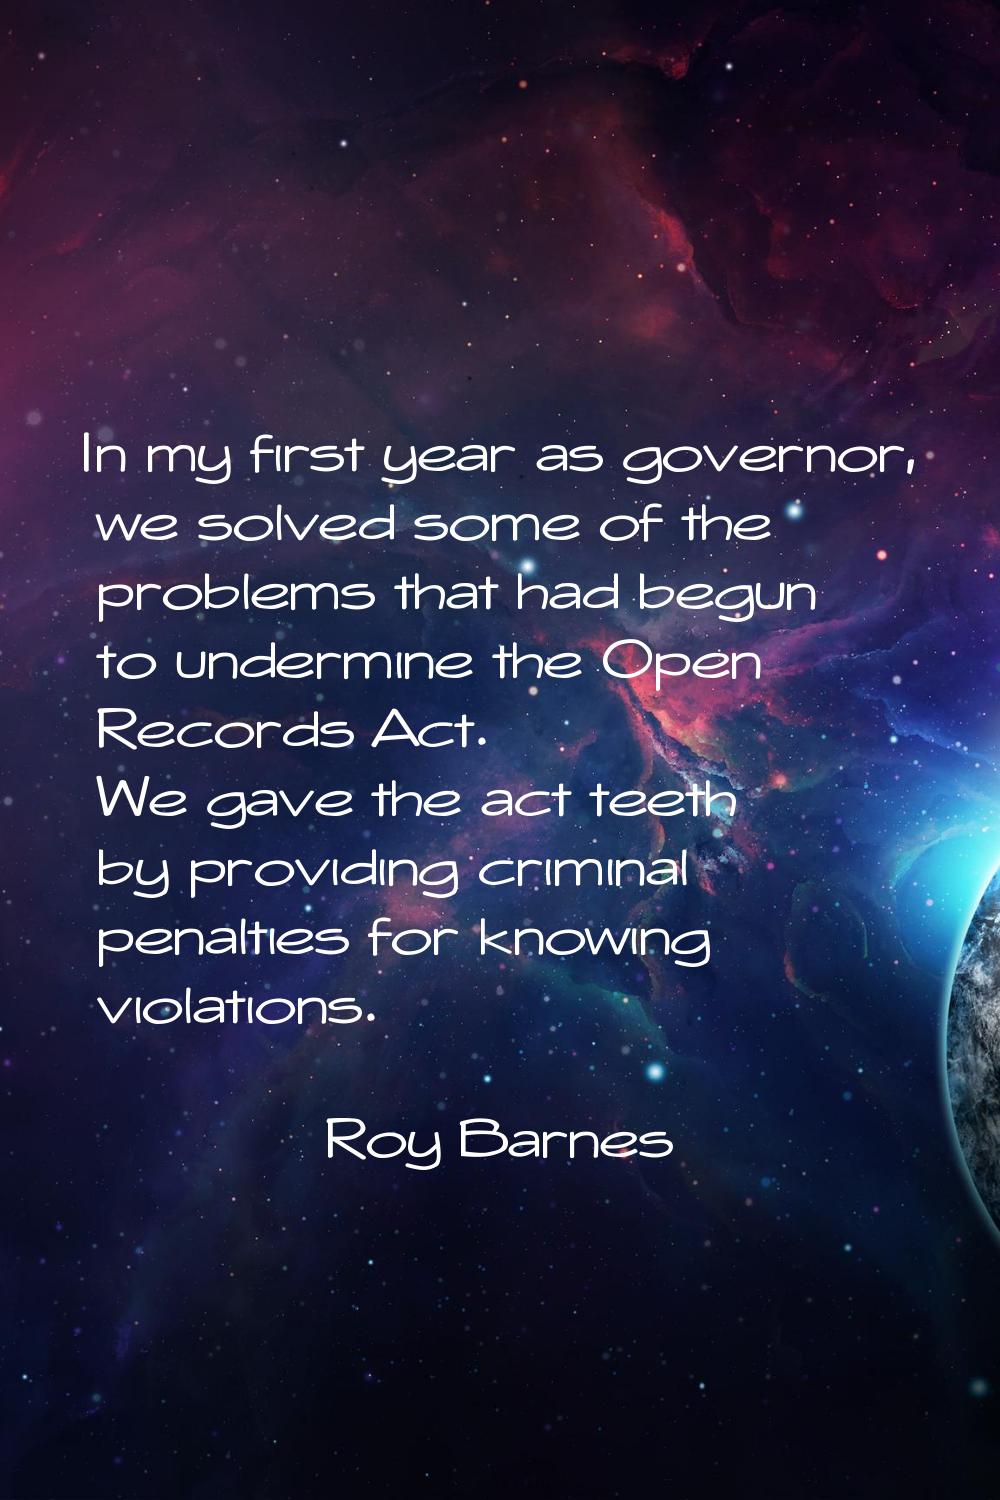 In my first year as governor, we solved some of the problems that had begun to undermine the Open R